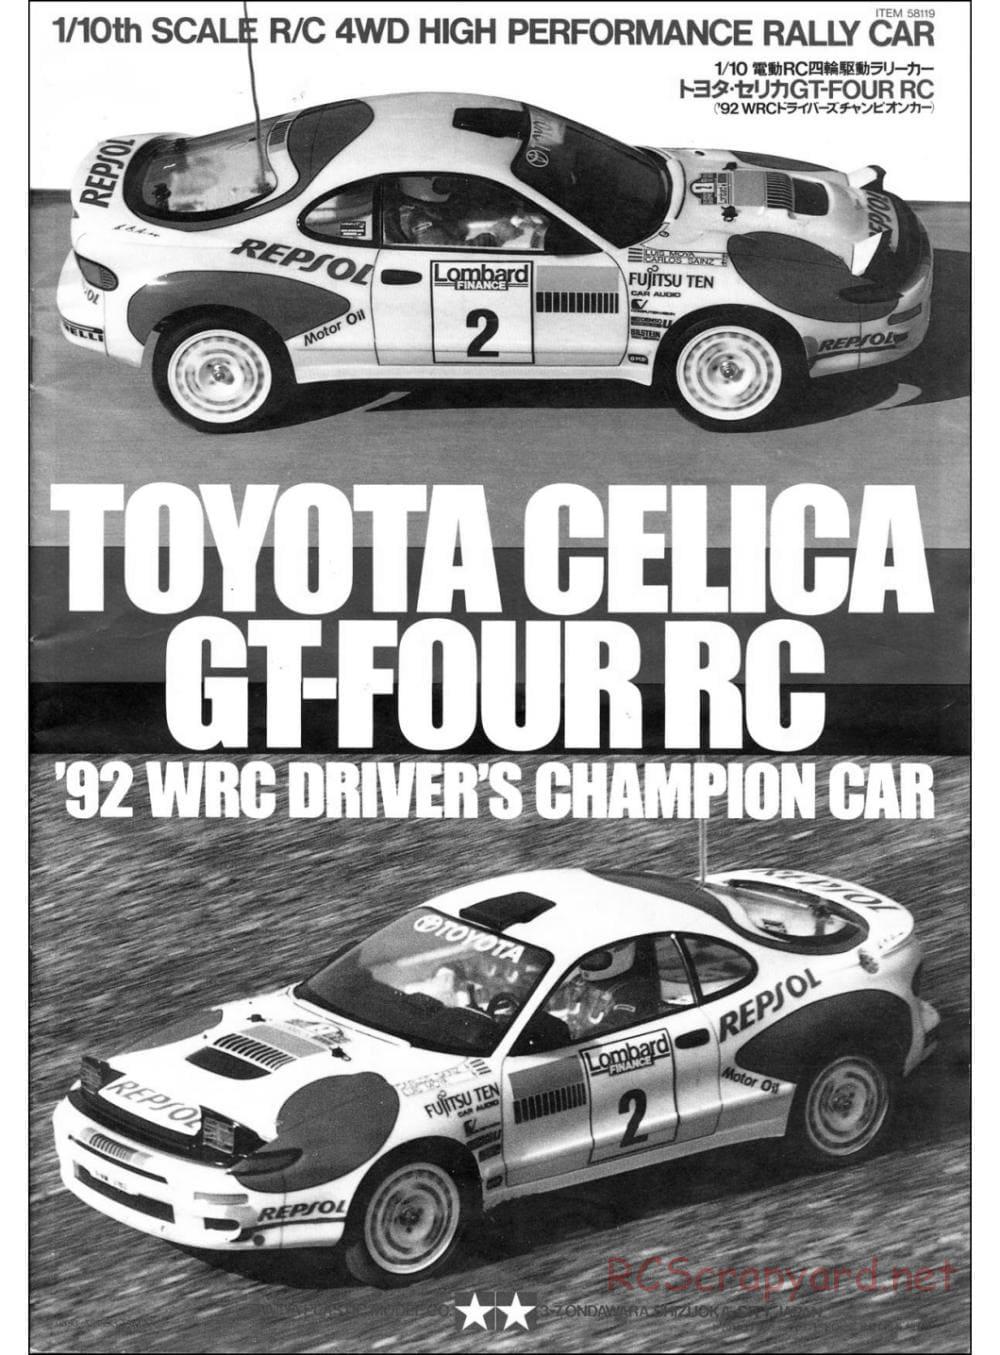 Tamiya - Toyota Celica GT-Four RC - TA-01 Chassis - Manual - Page 1